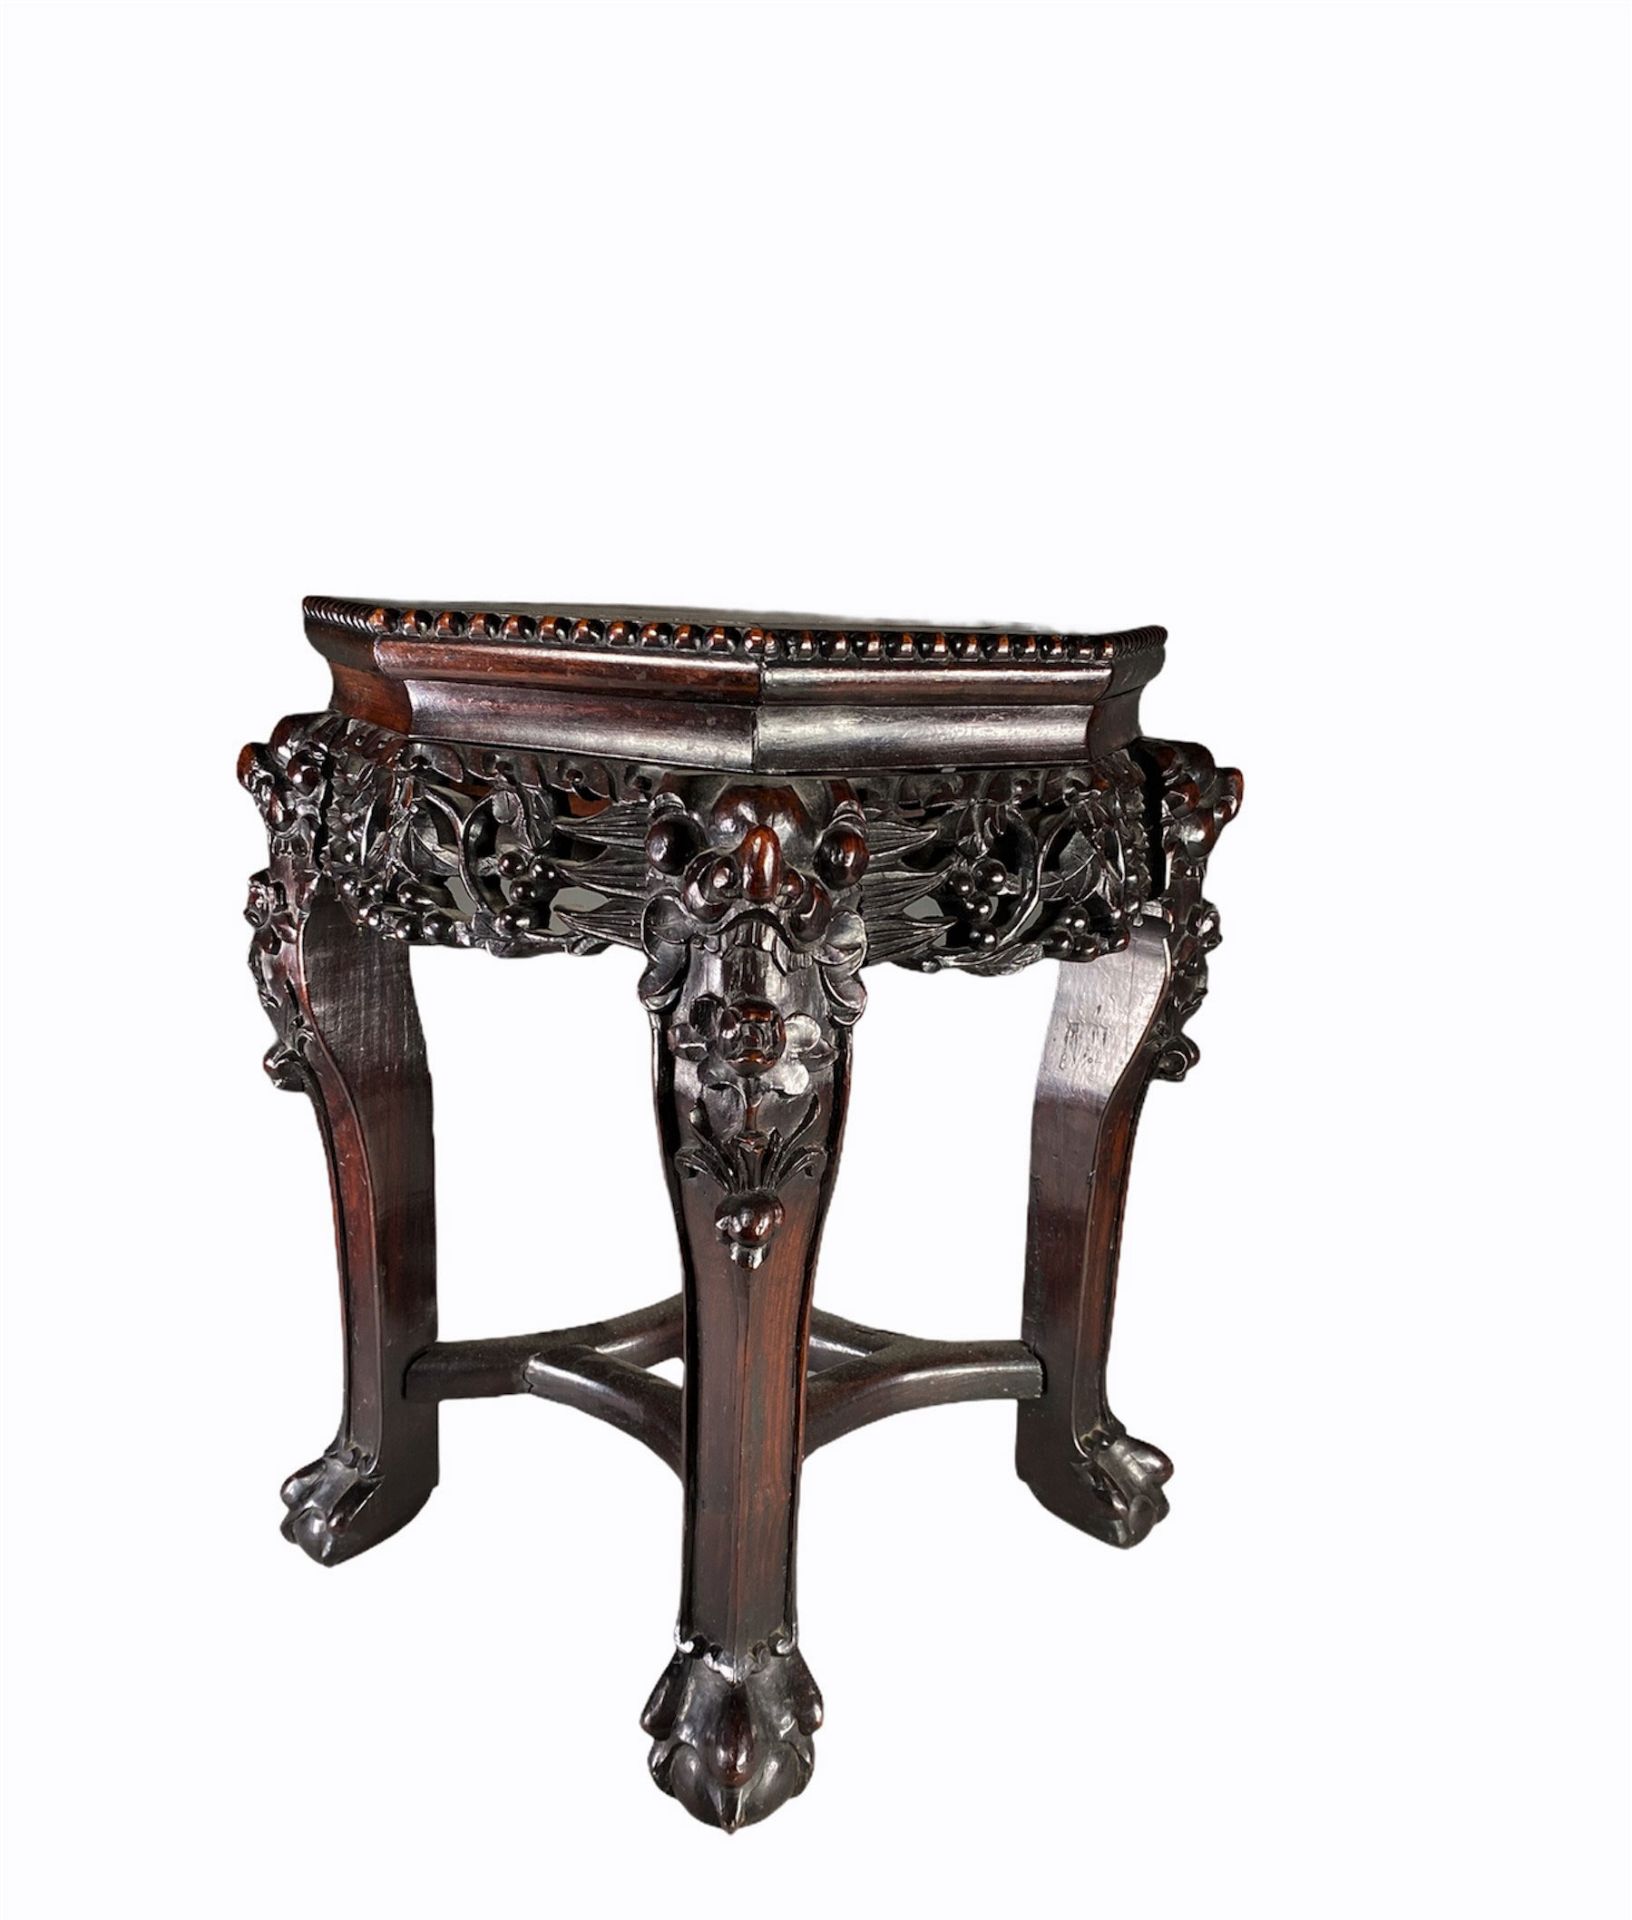 Iron wood saddle with marble top, late 19th century China.